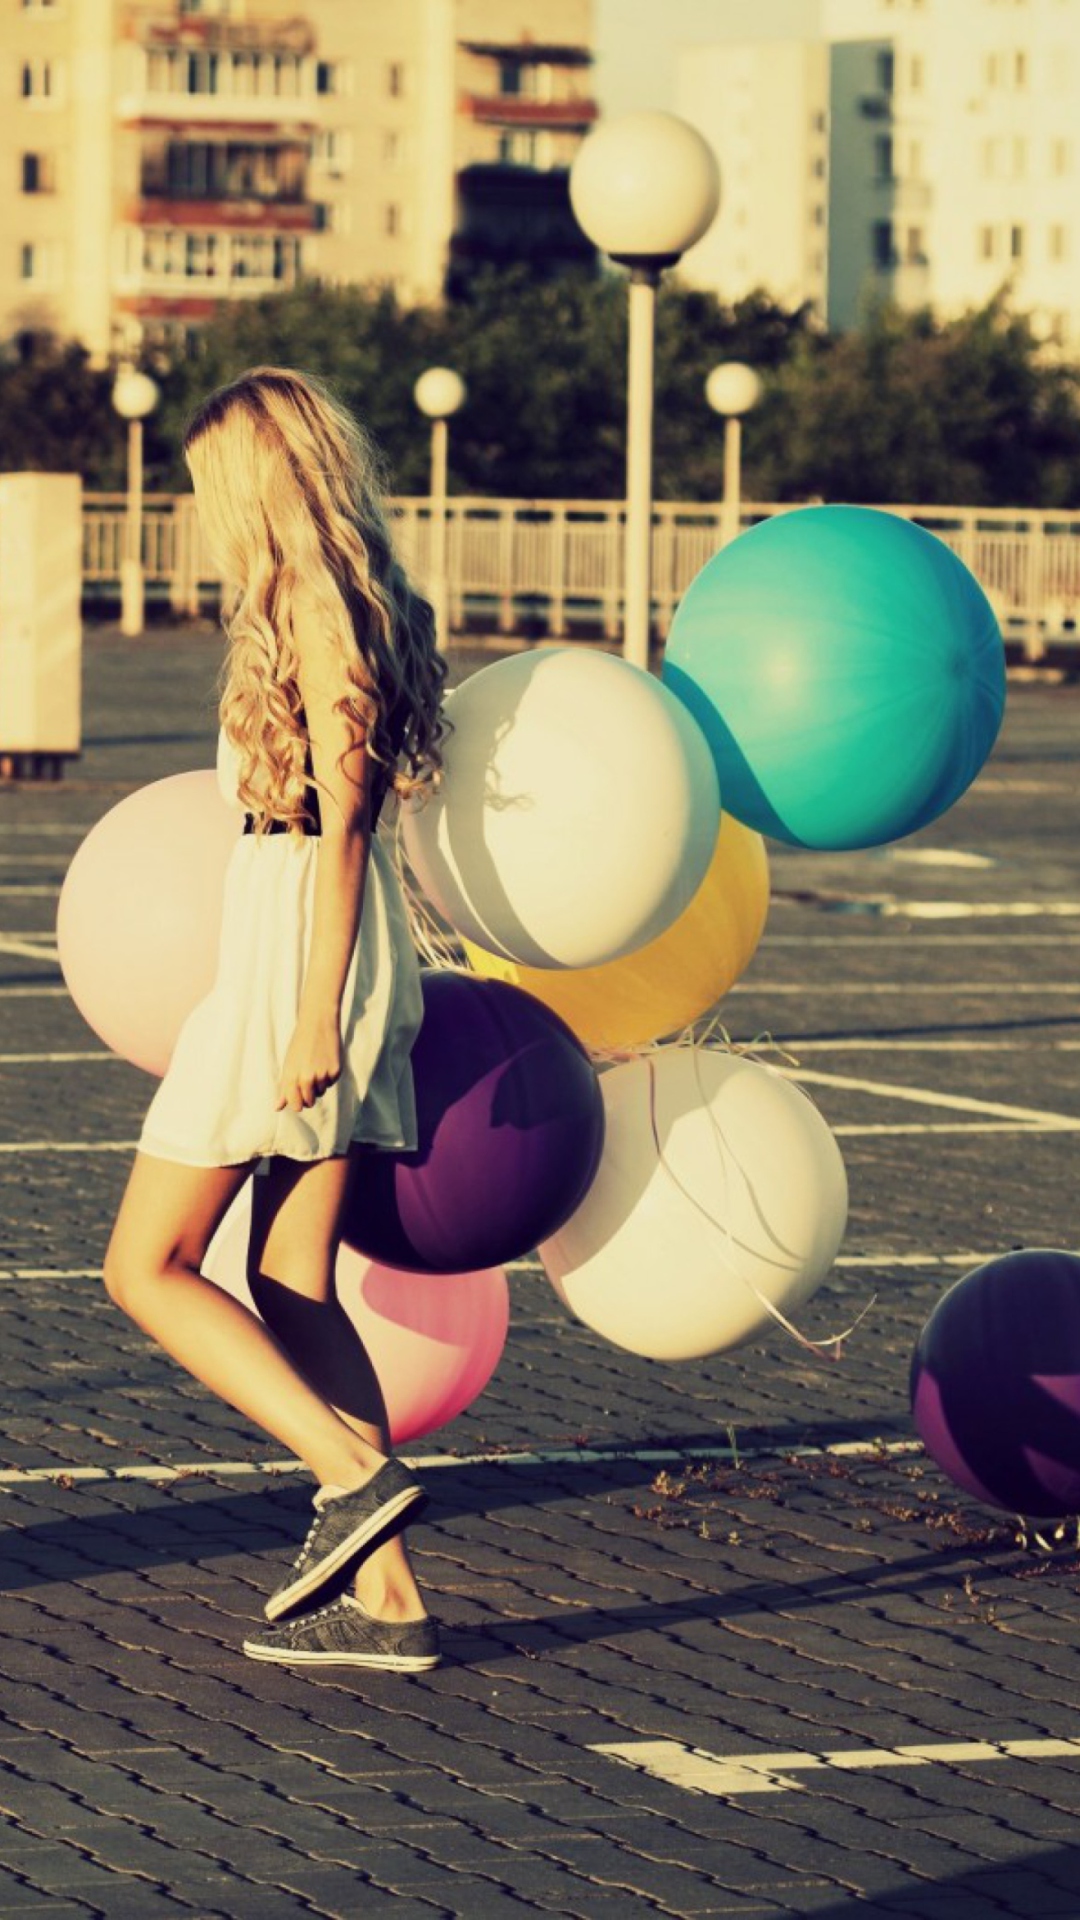 Happy Girl With Colorful Balloons screenshot #1 1080x1920